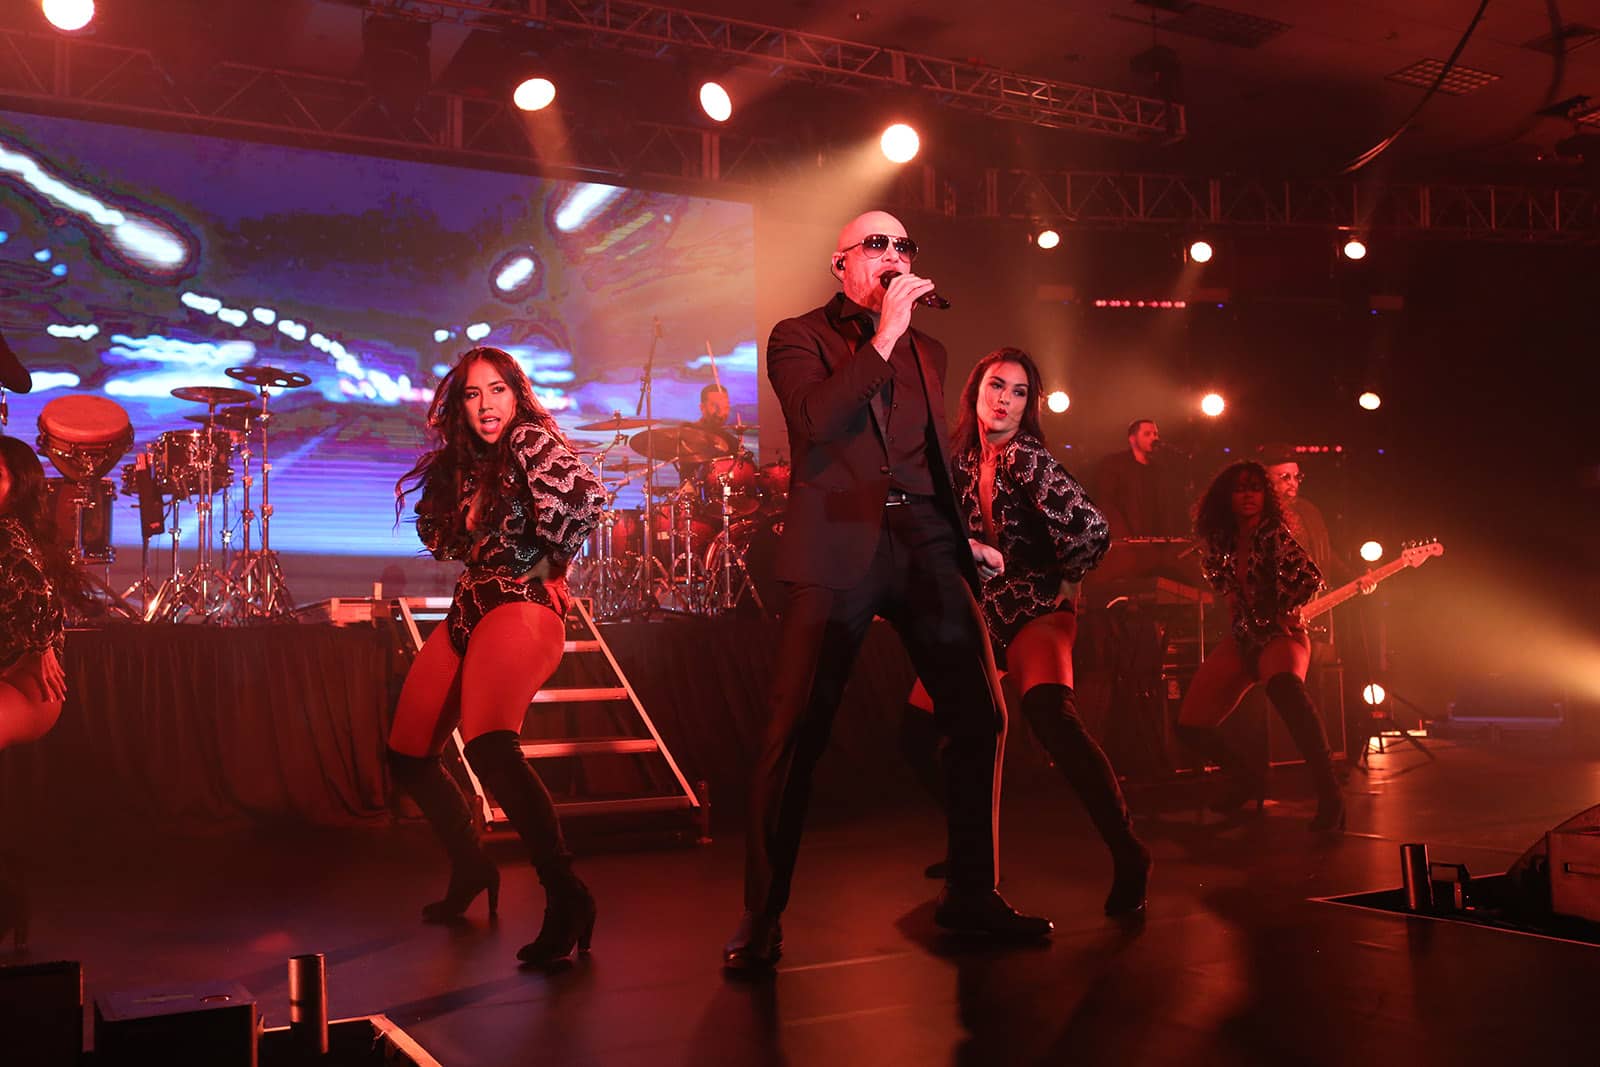 Pitbull Performs at CruiseWorld 2018 Event Hosted by Norwegian